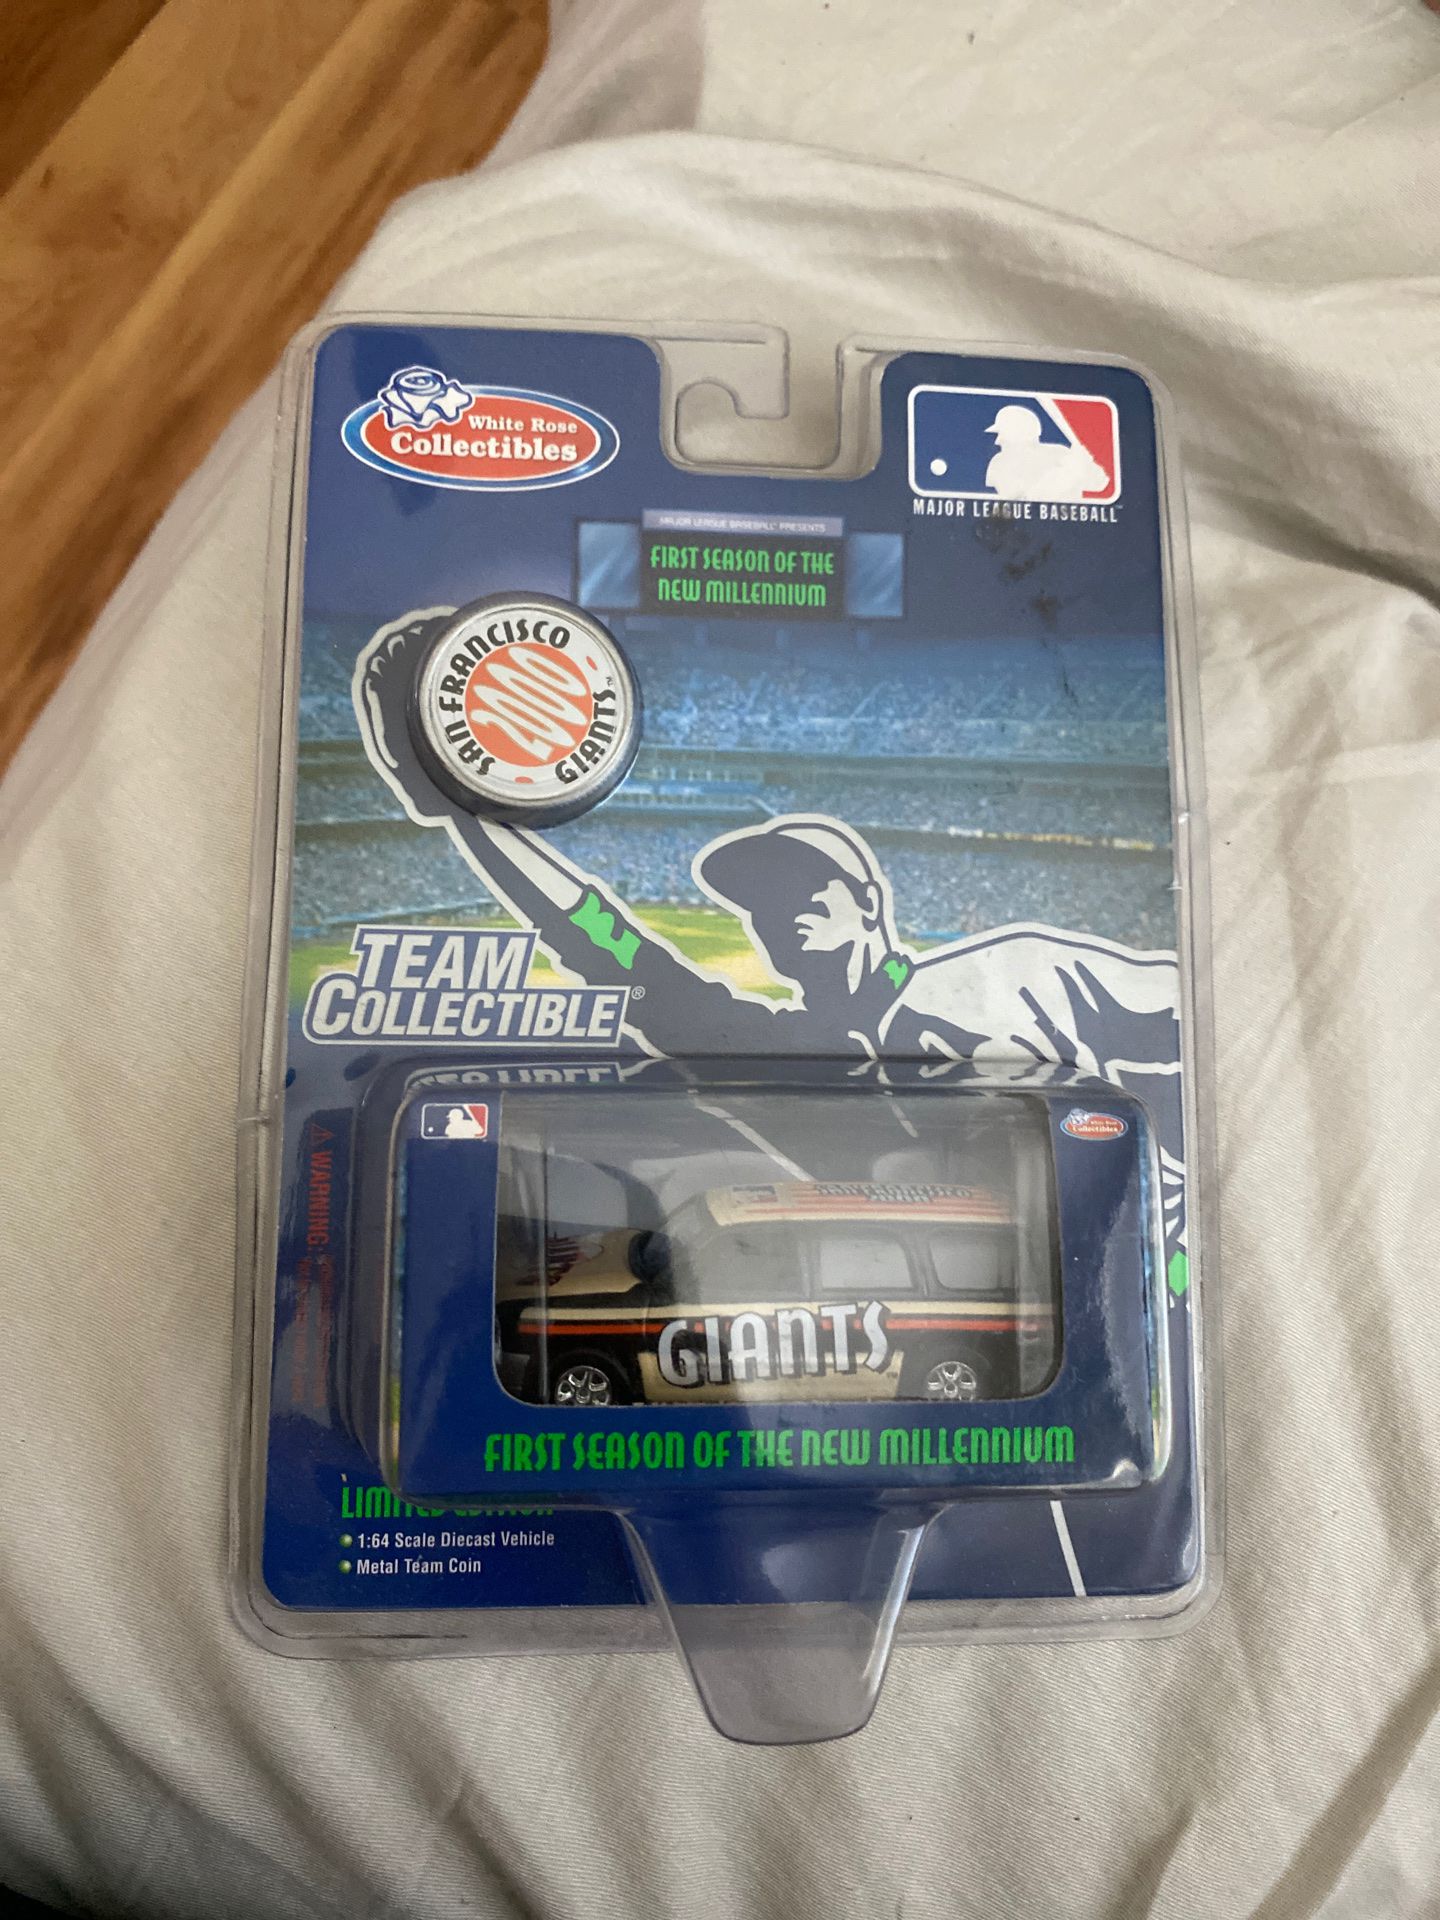 Limited Edition San Francisco Giants Team Collectible Toy Car 2000